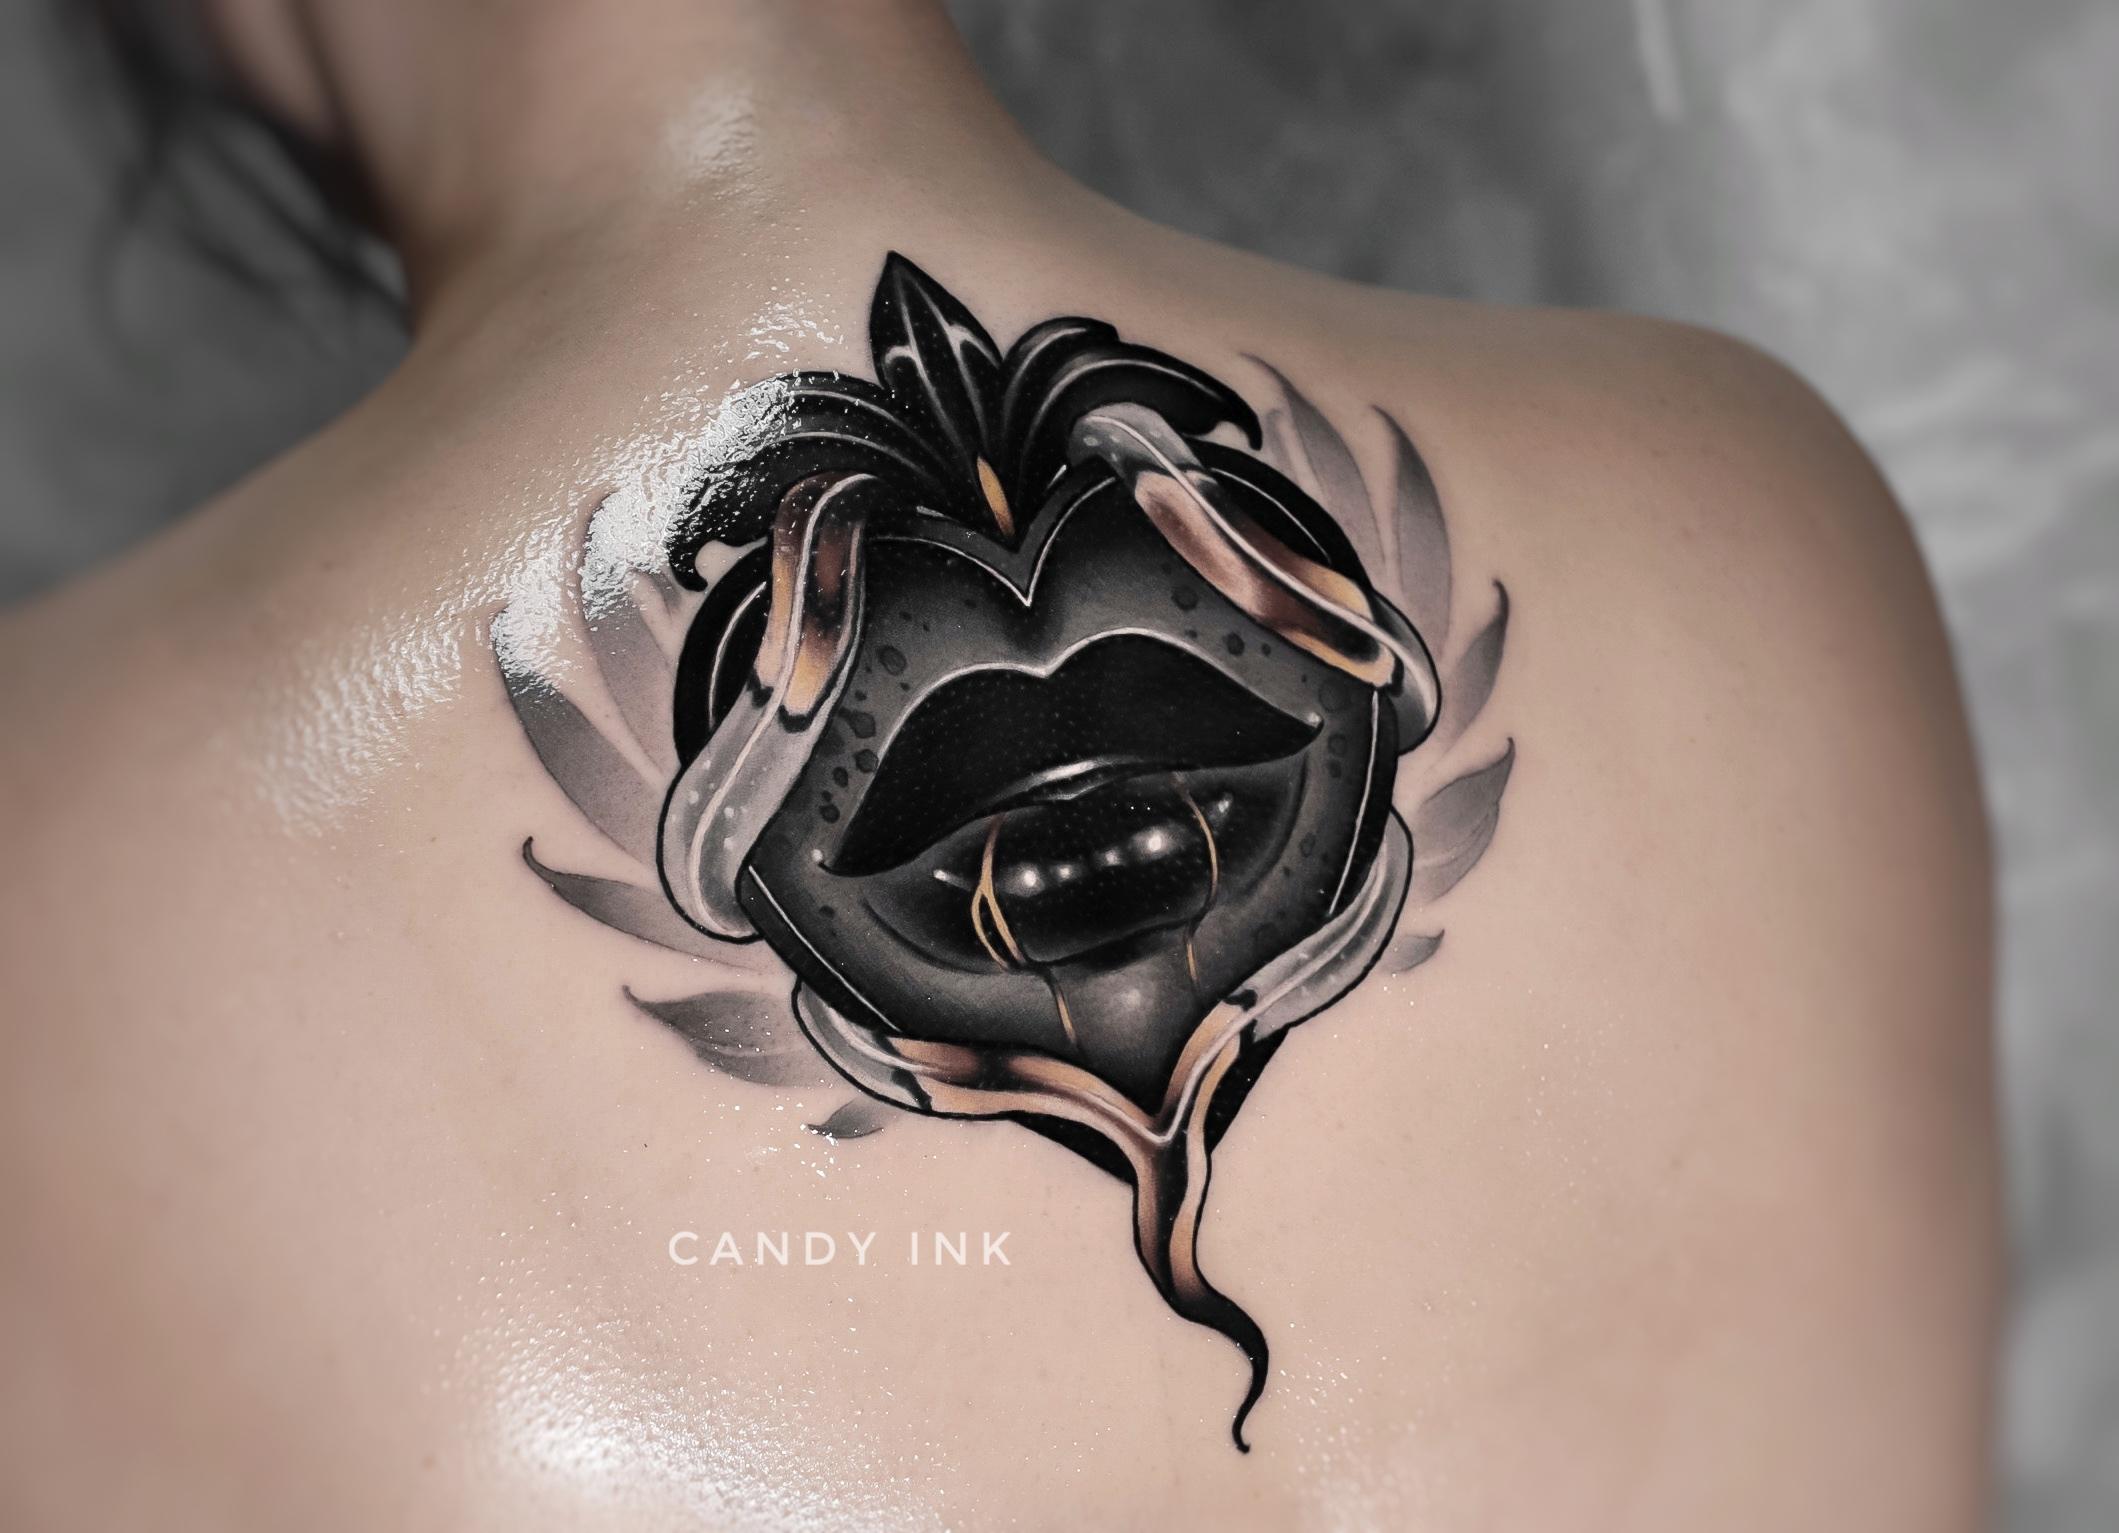 Inksearch tattoo Candy Ink